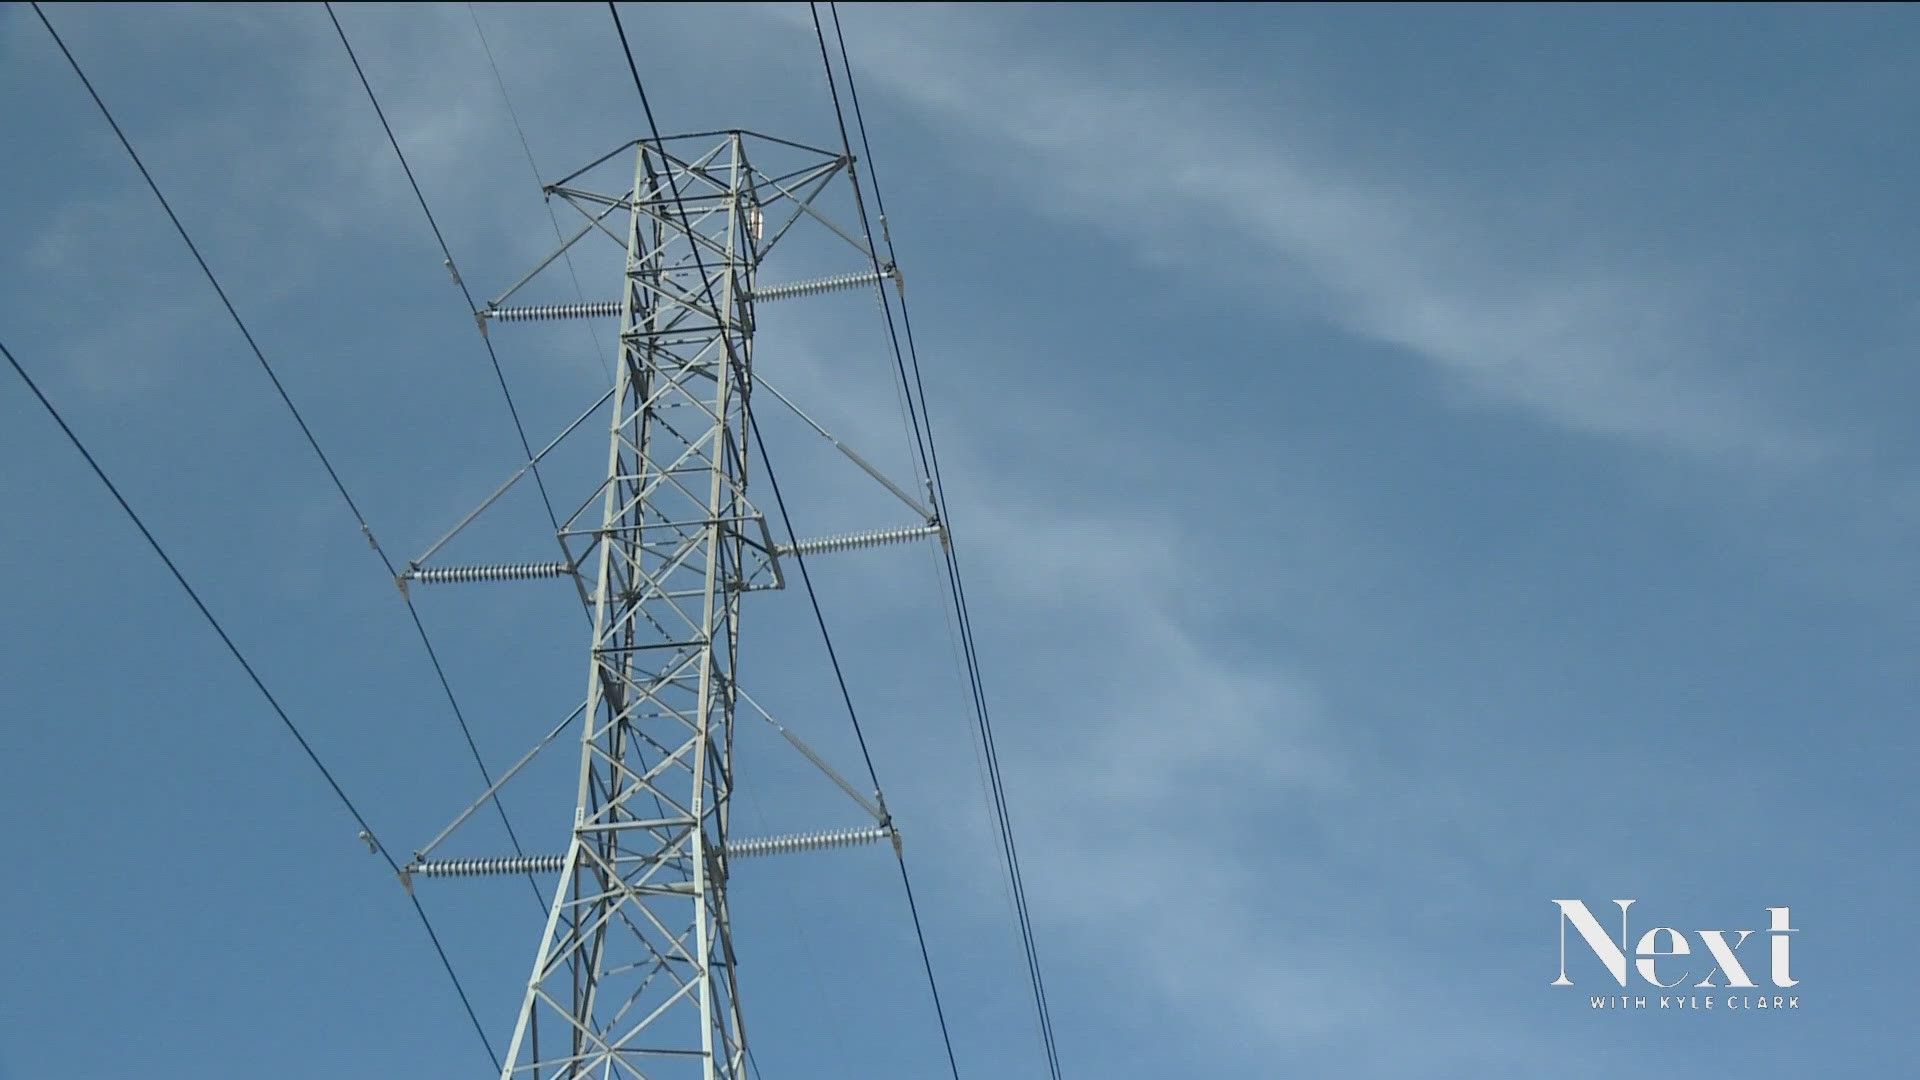 State regulators heard from Coloradans impacted by Xcel's decision to preemptively shut off power to 55,000 customers this month due to high winds.